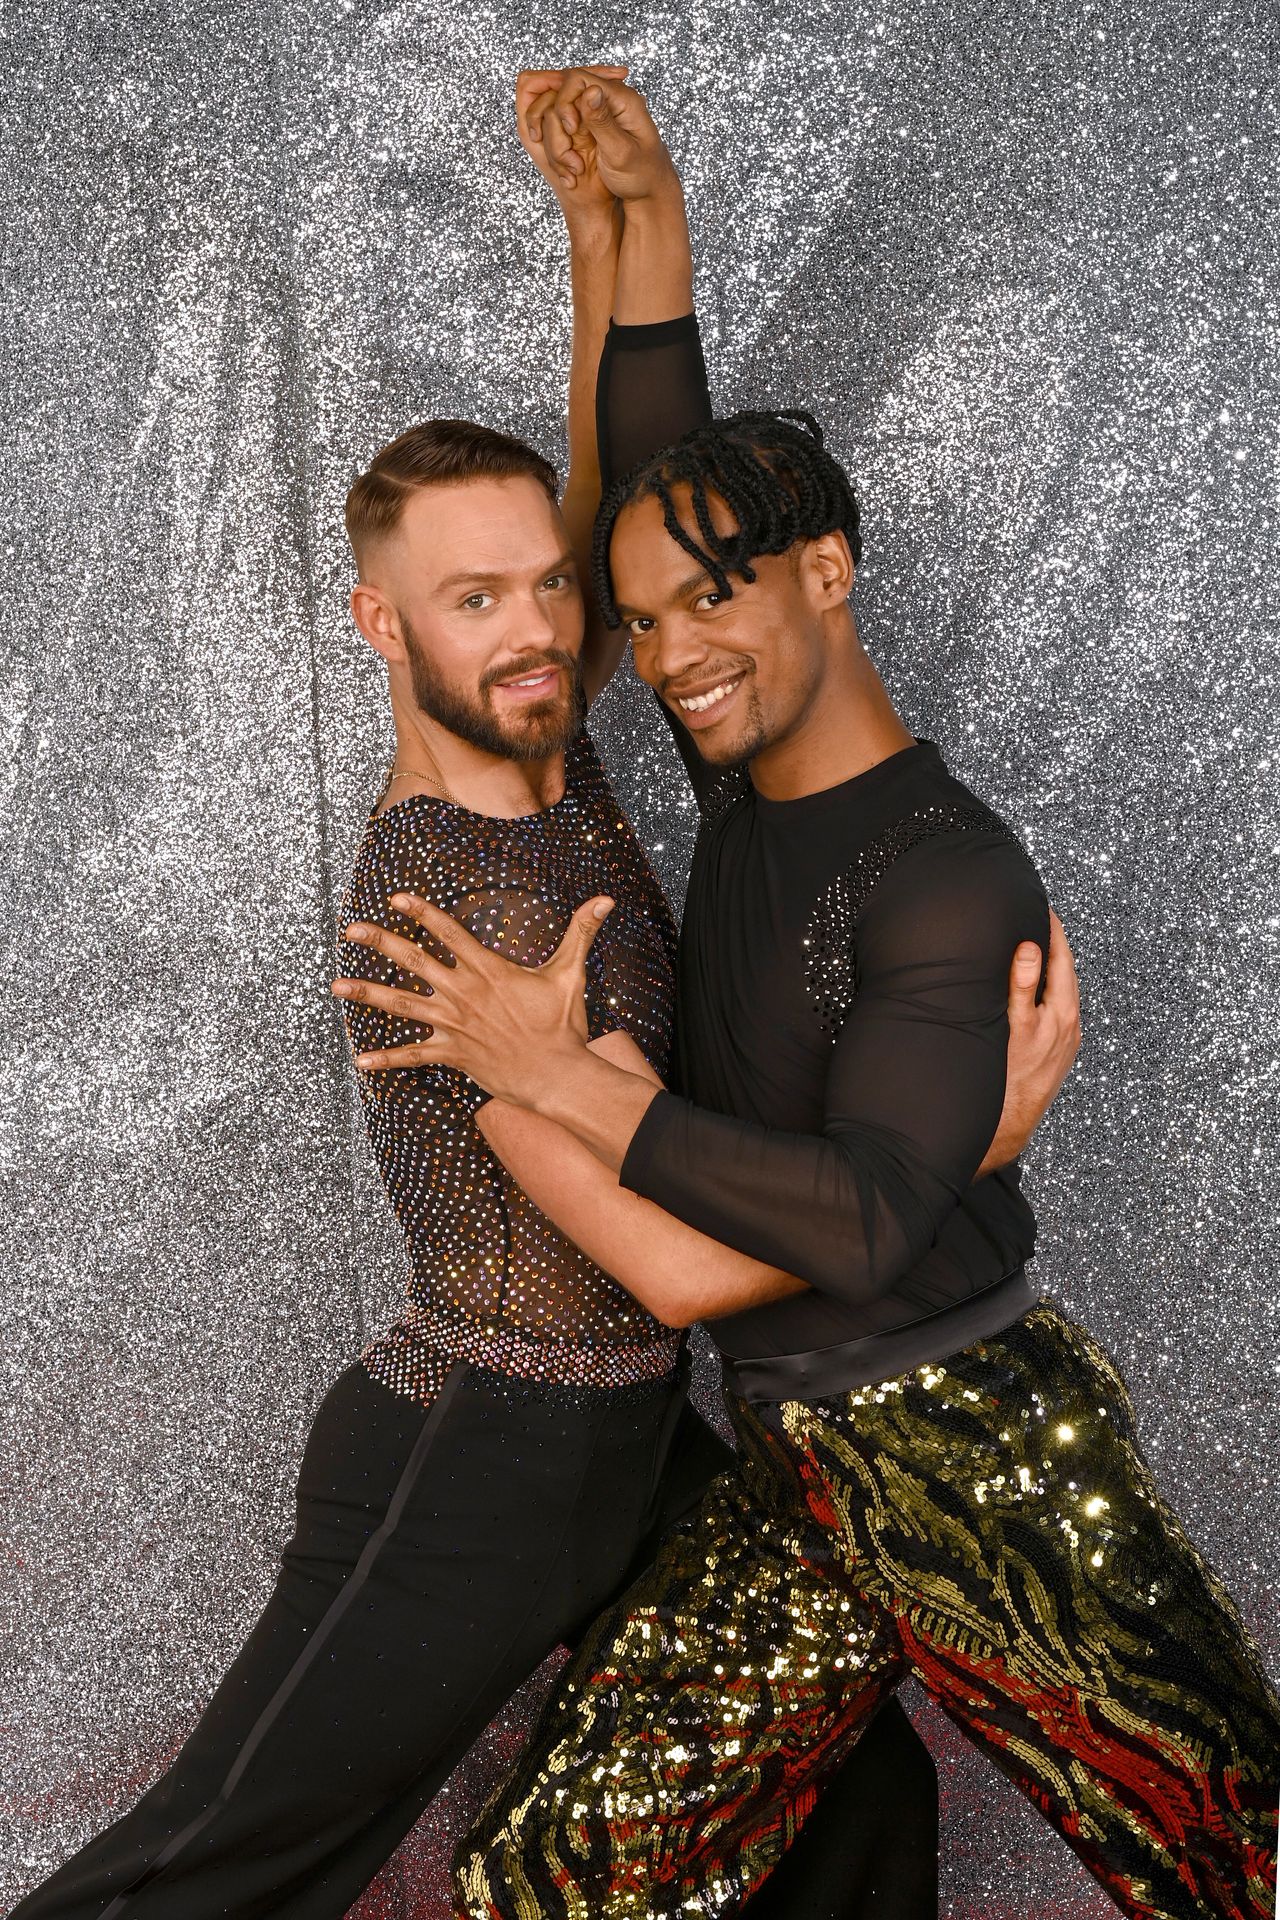 Johannes and John behind the scenes of the recent Strictly tour